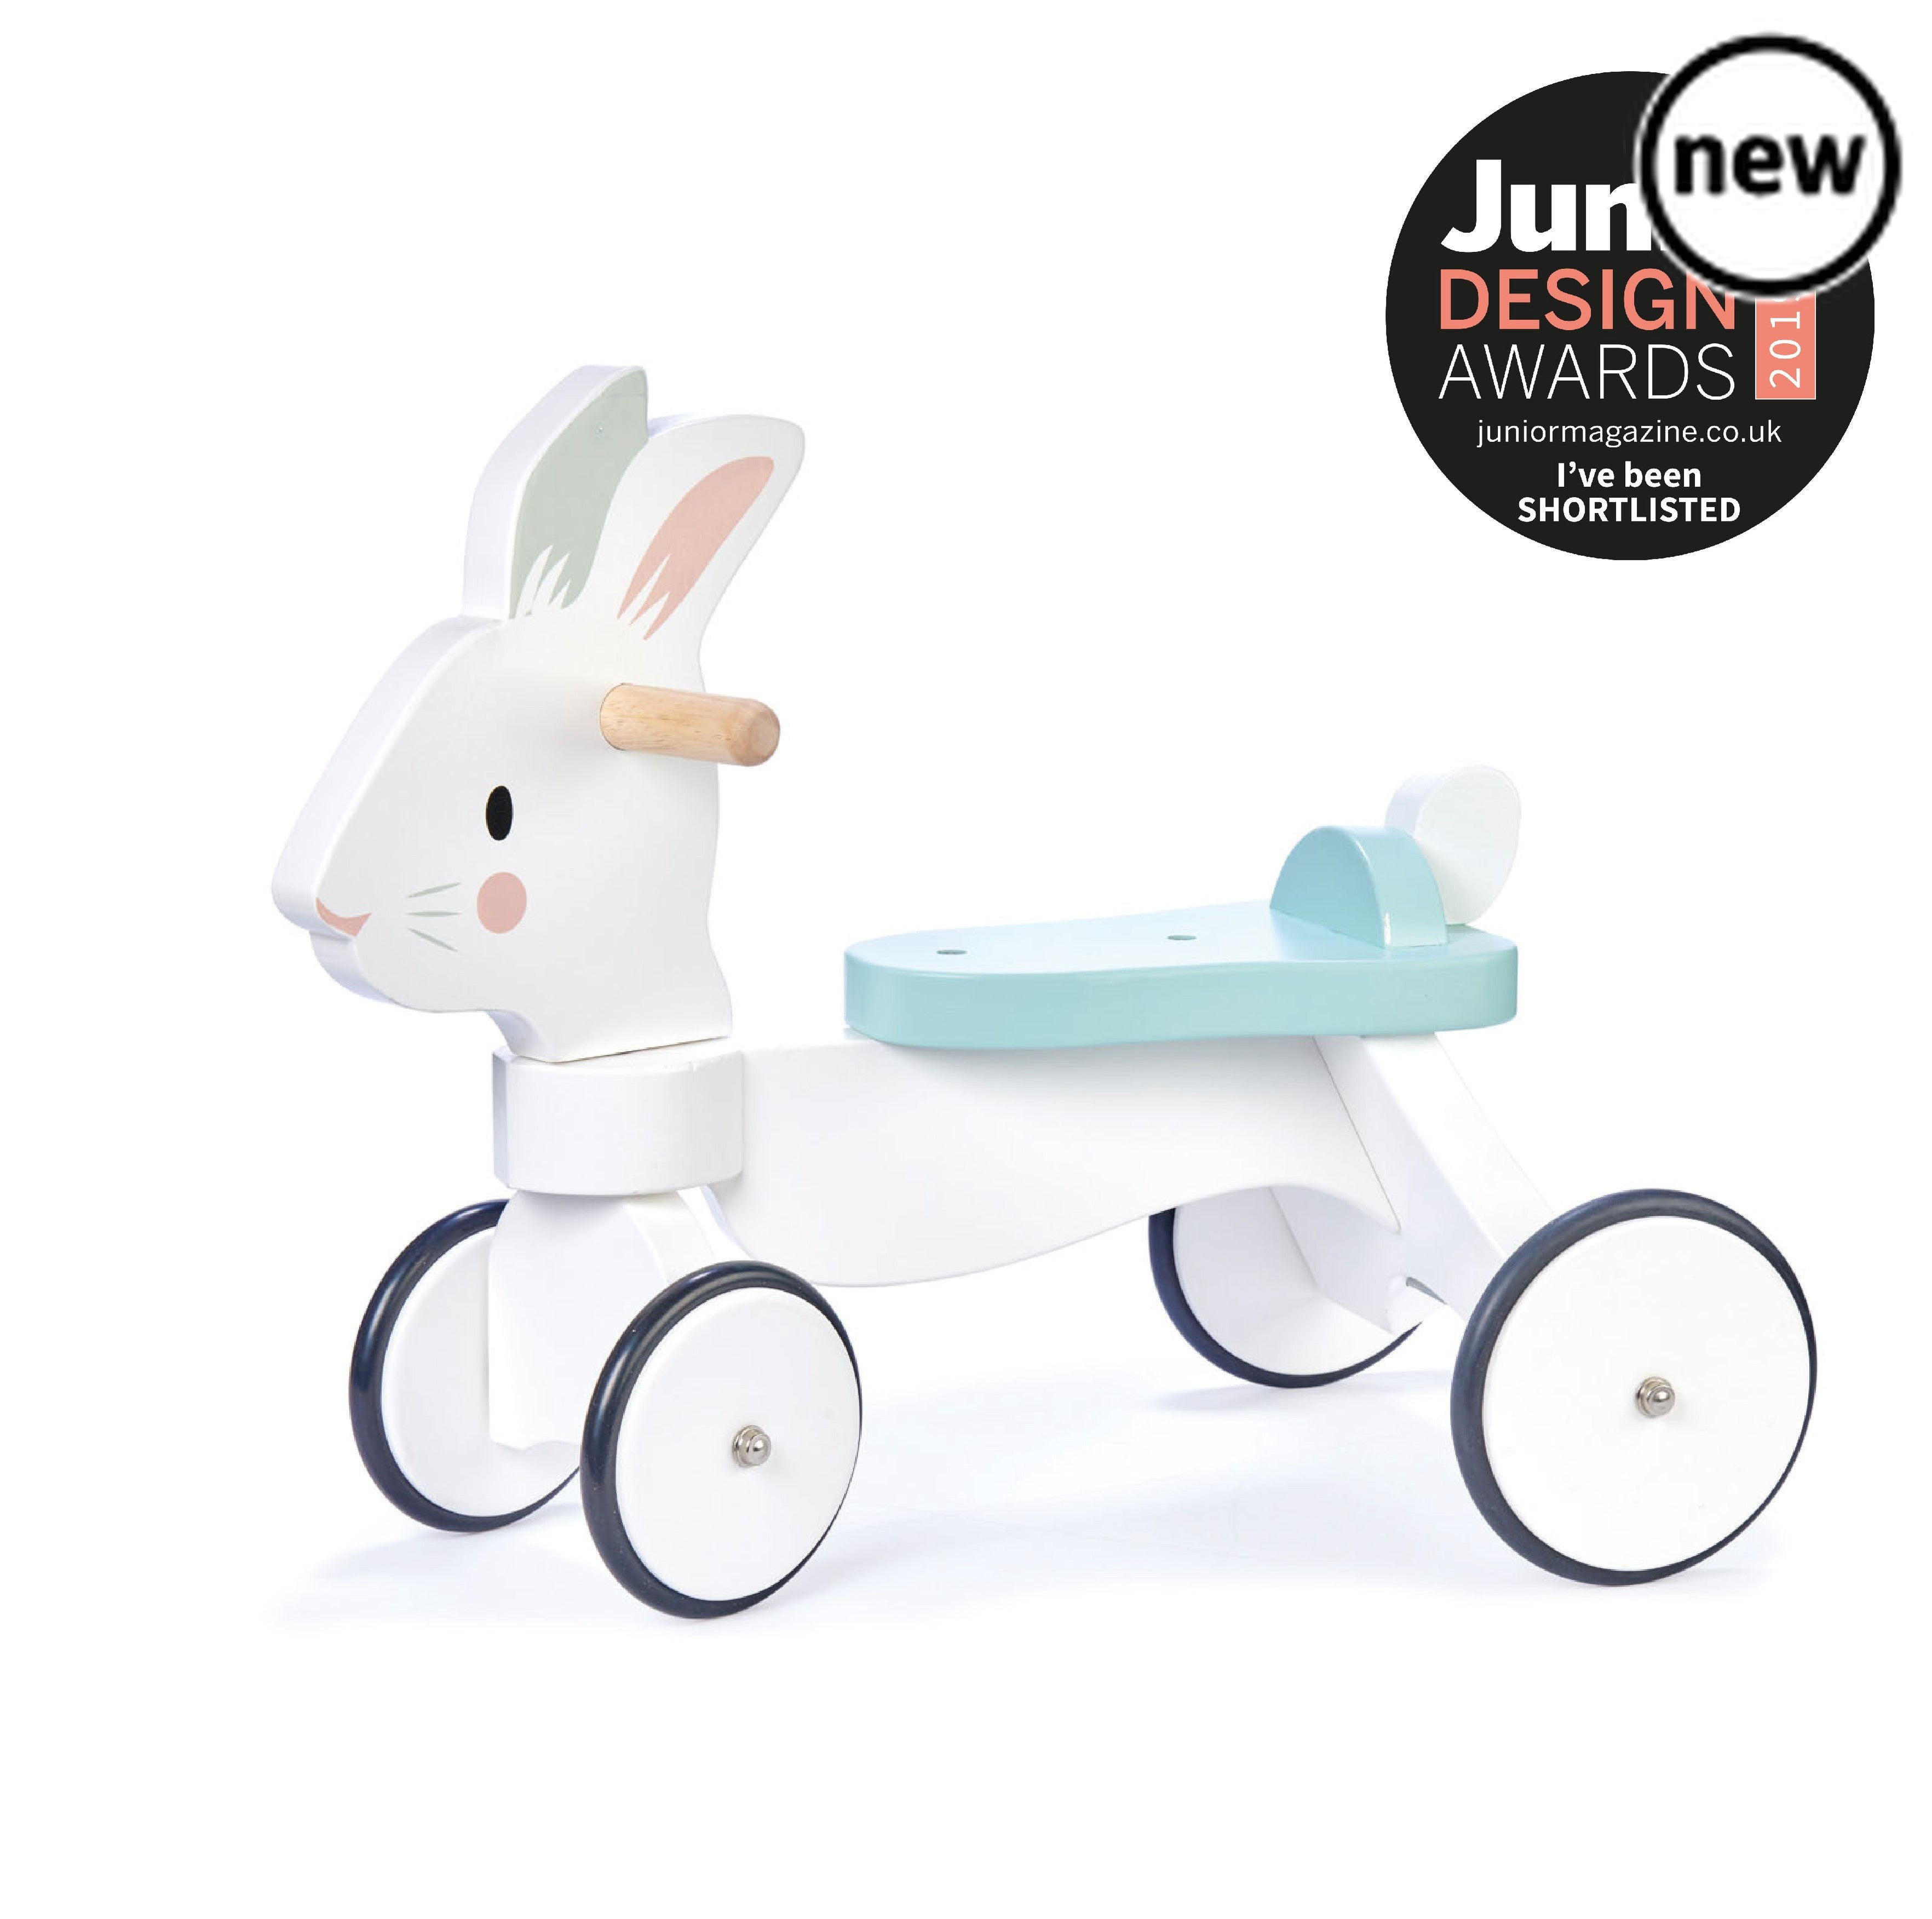 Running Rabbit Ride On, The Running Rabbit Ride On is a delightful toy which was been shortlisted for the prestigious Junior Design Awards 2019, proving its excellence in design and quality.This classic ride on bunny rabbit is not only adorable but also extremely sturdy. The white rabbit is made from solid rubber wood, ensuring durability and long-lasting play. The non-slip rubber trimmed wheels provide stability and smooth movement, allowing your child to ride around with ease.Safety is paramount, which is